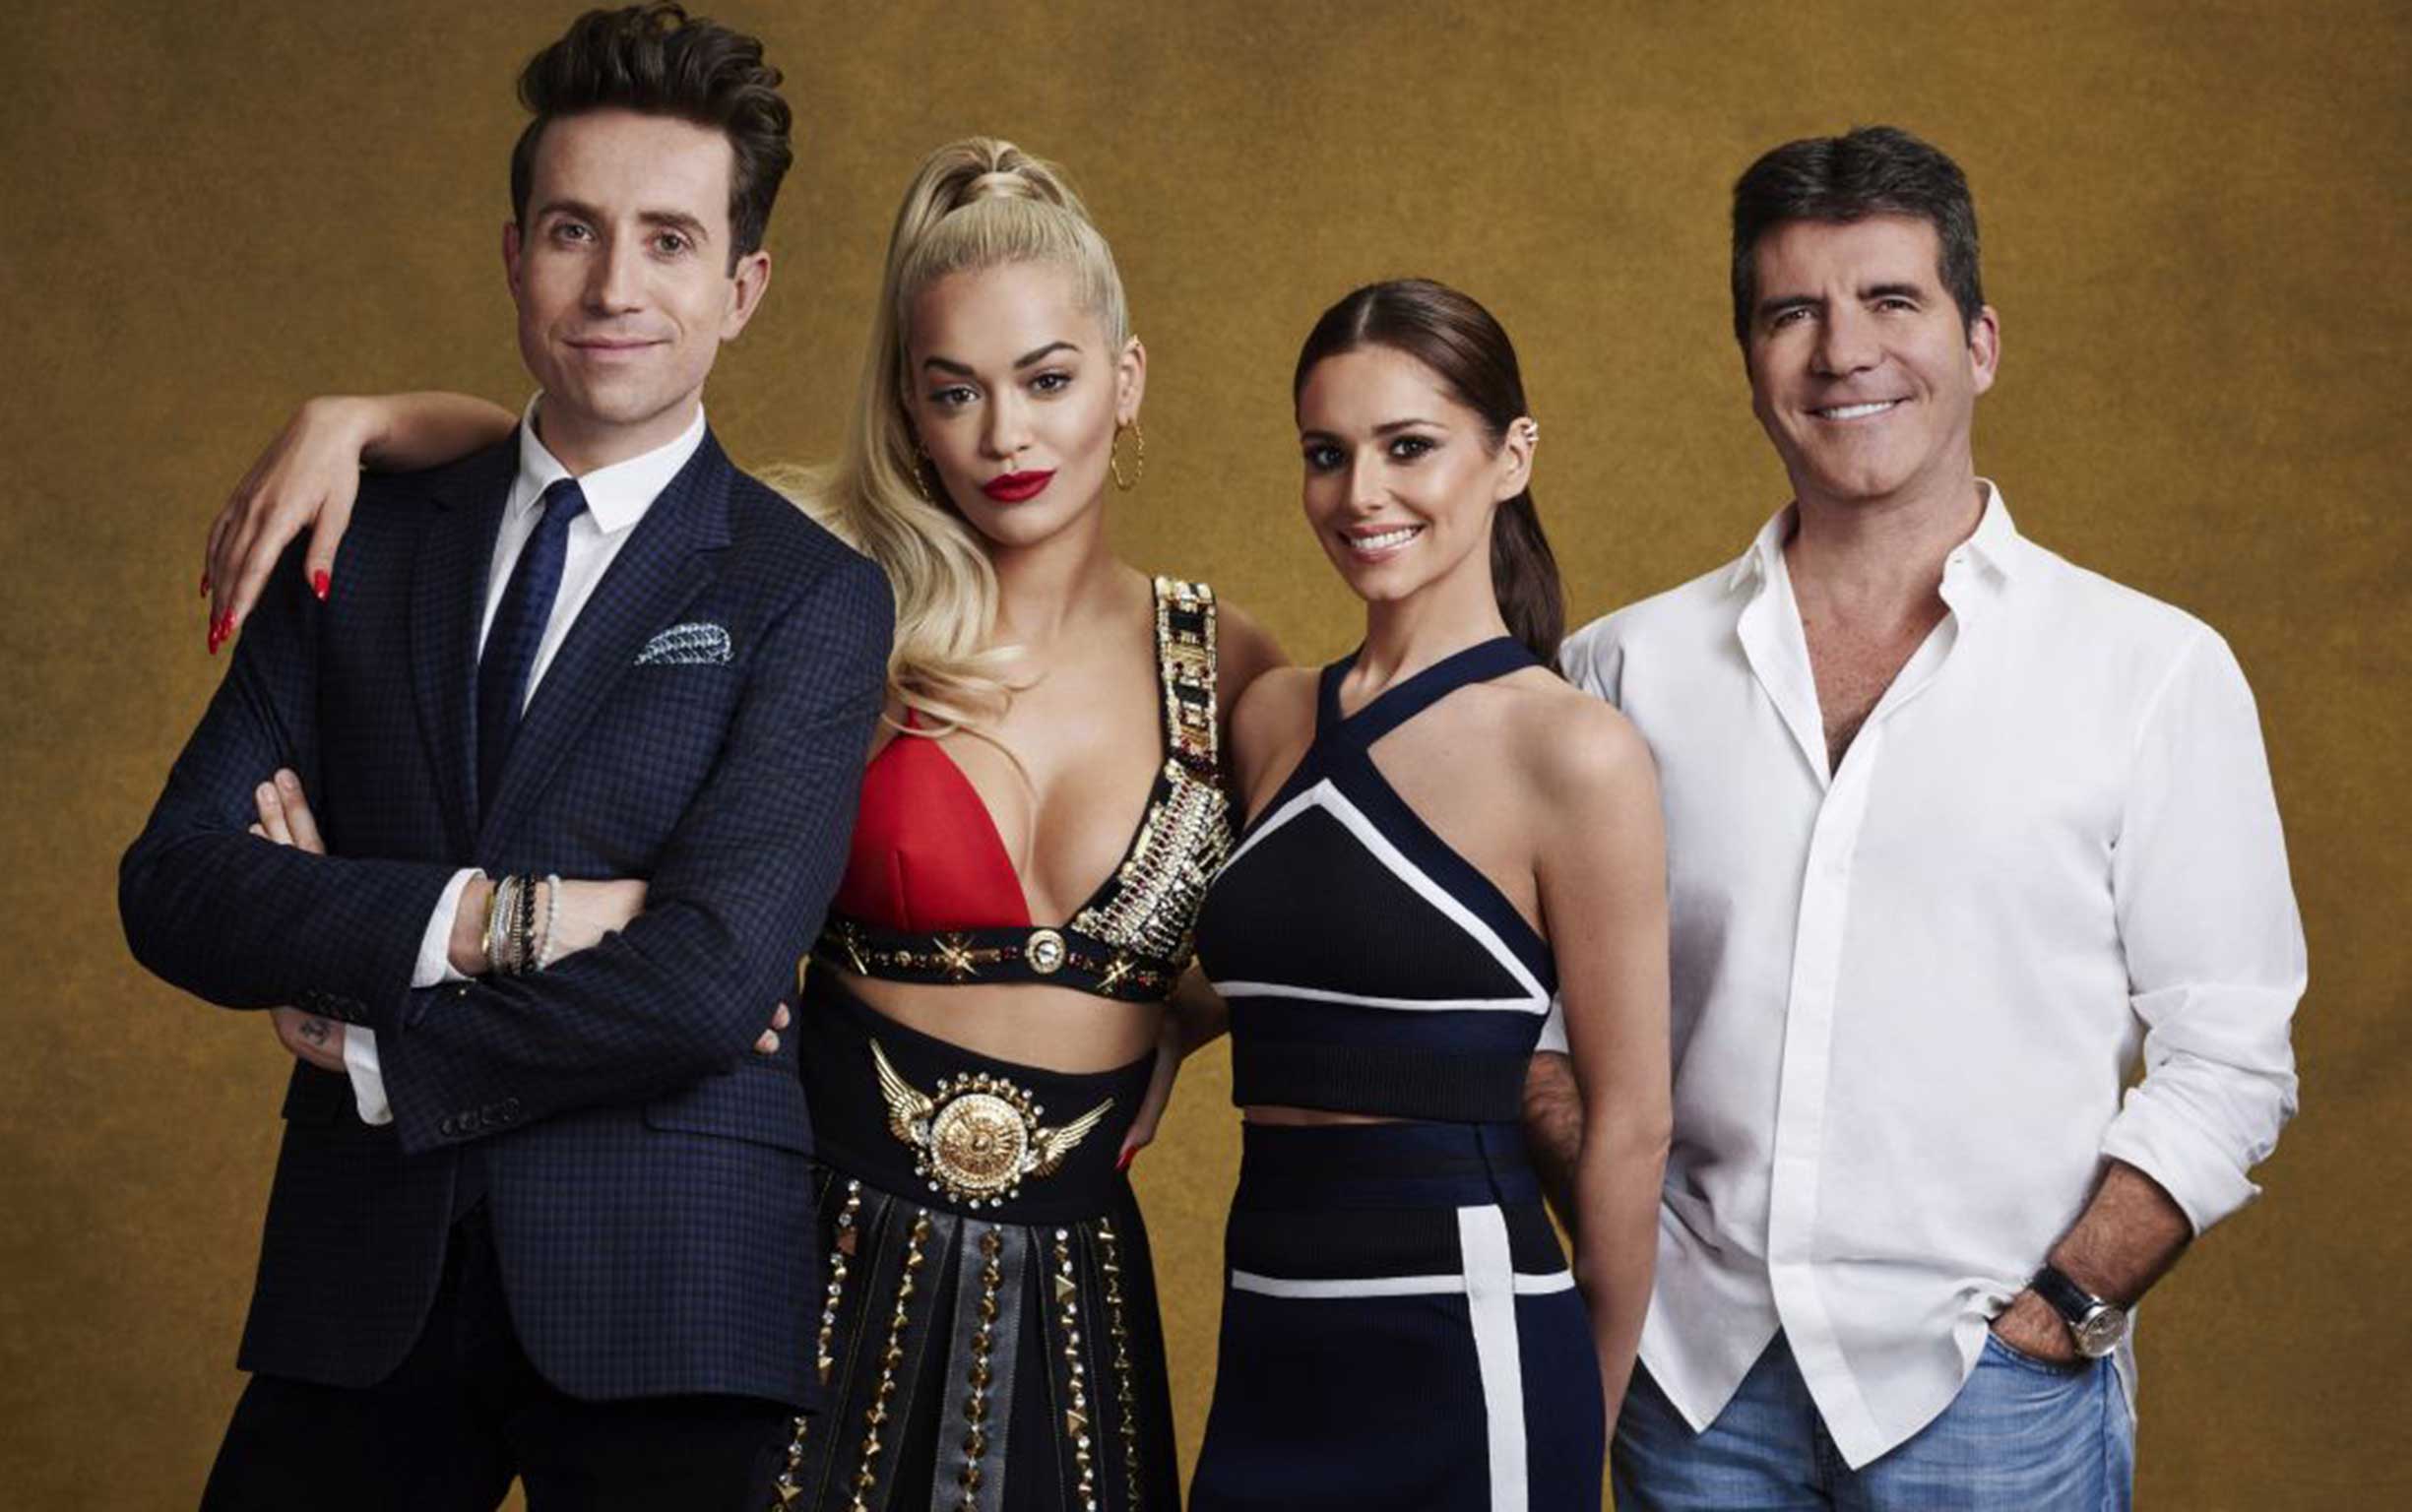 ITV hit show The XFactor line-up